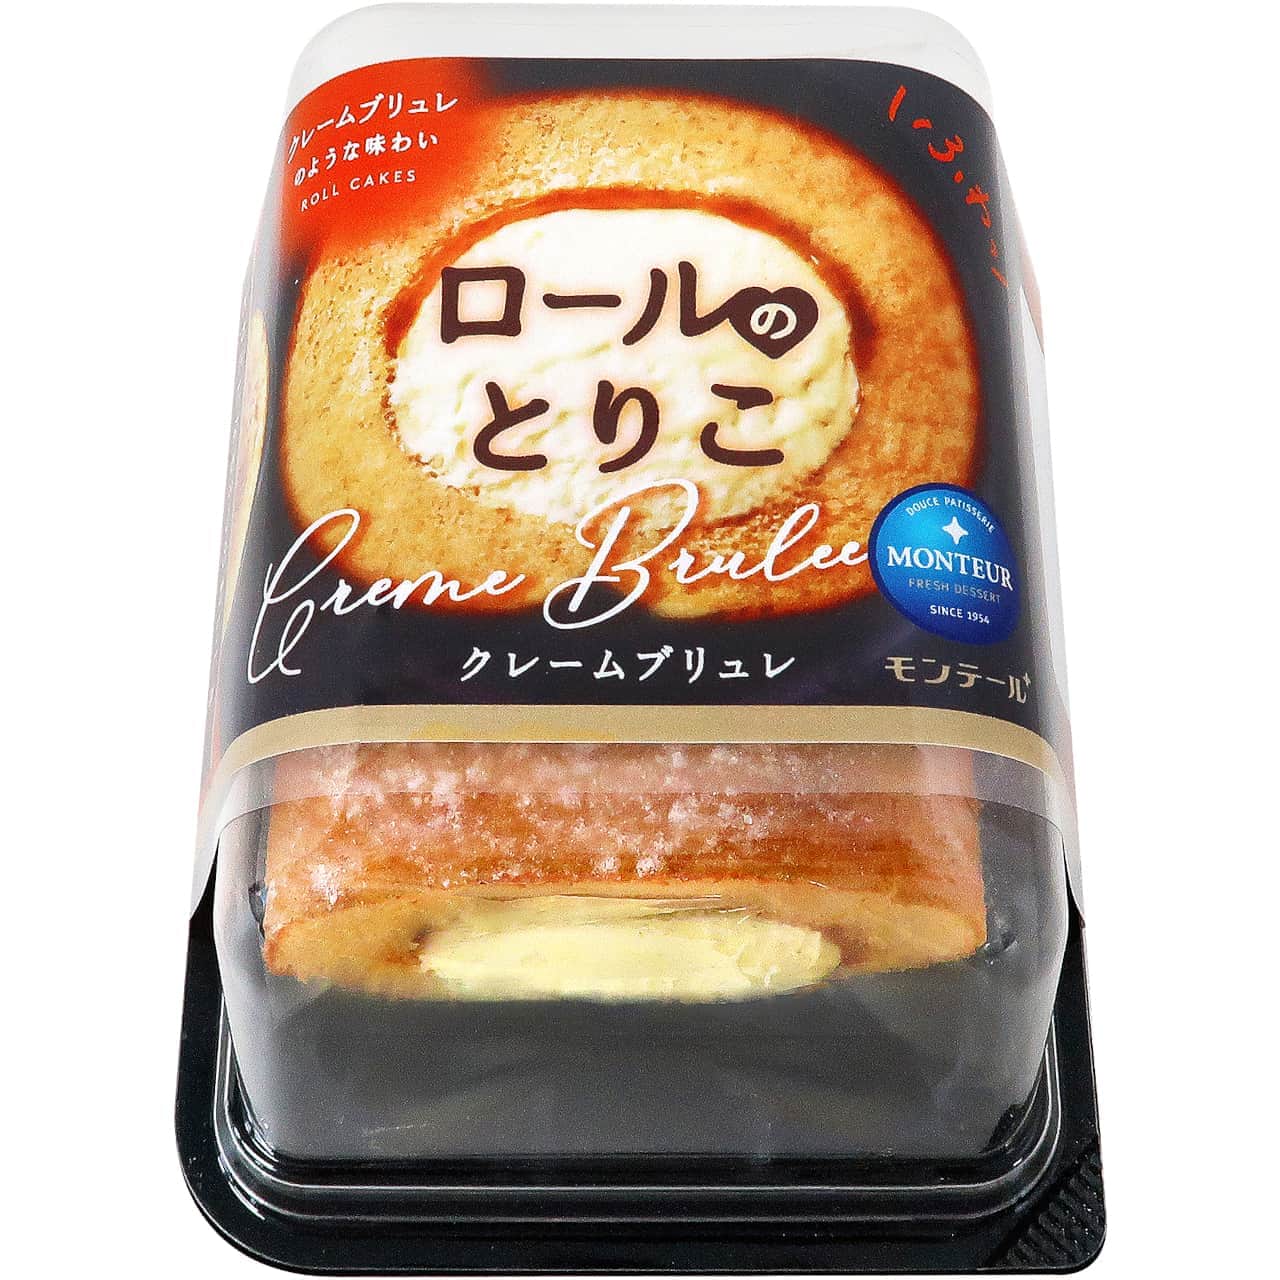 MONTAIRE "4P Rolls of Toriko Crème Brulee" package